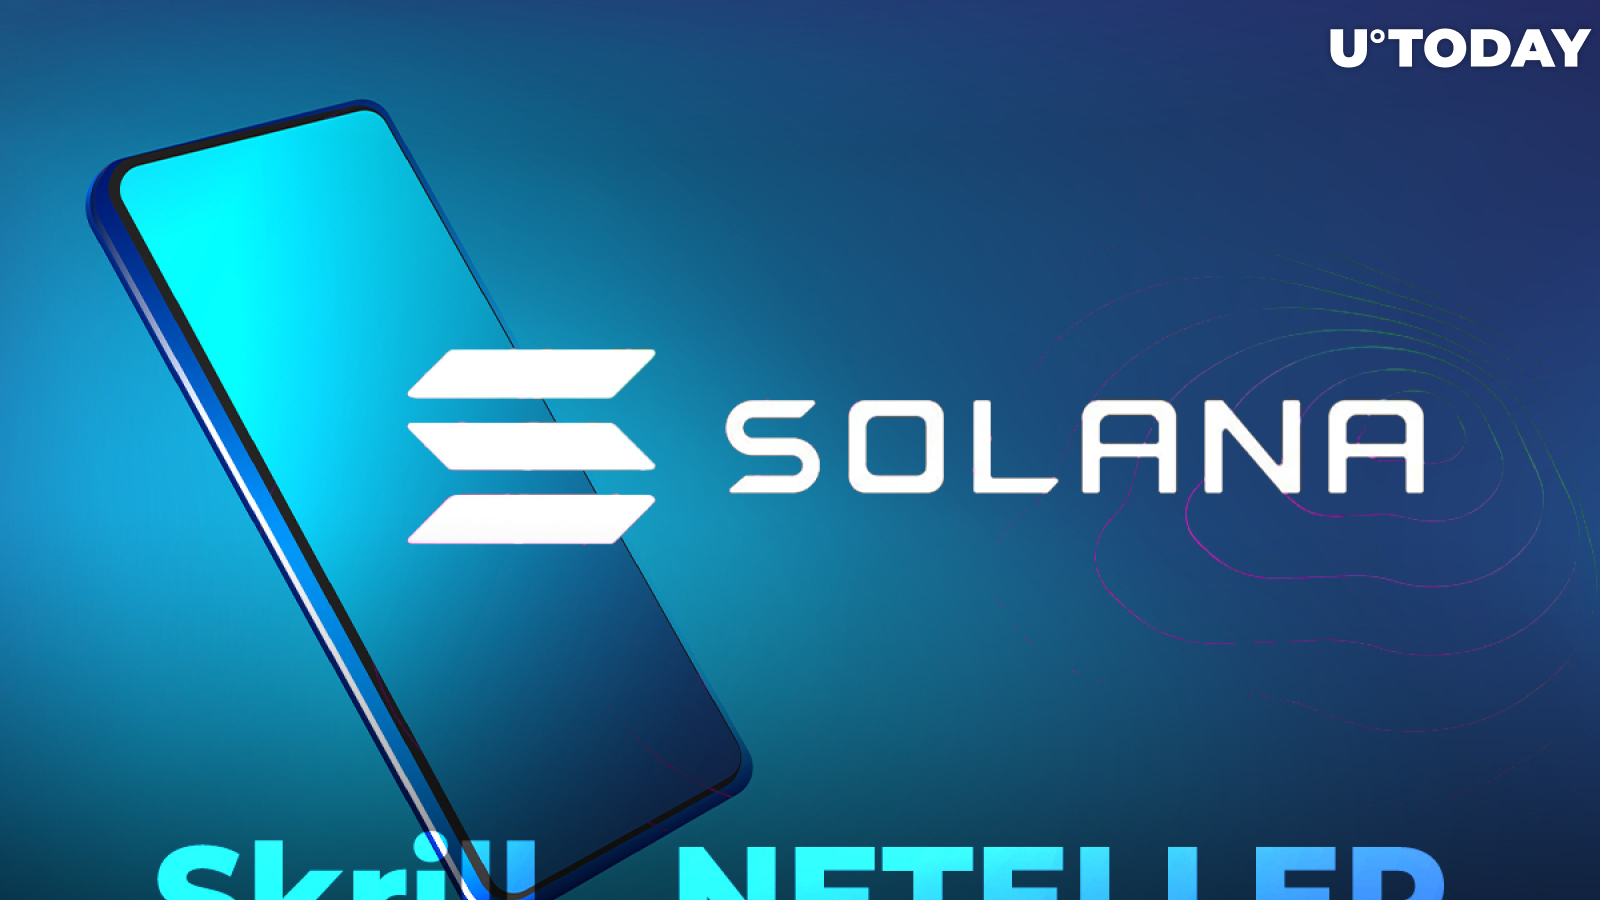 Solana (SOL) Support Added by Paysafe Services Skrill and NETELLER